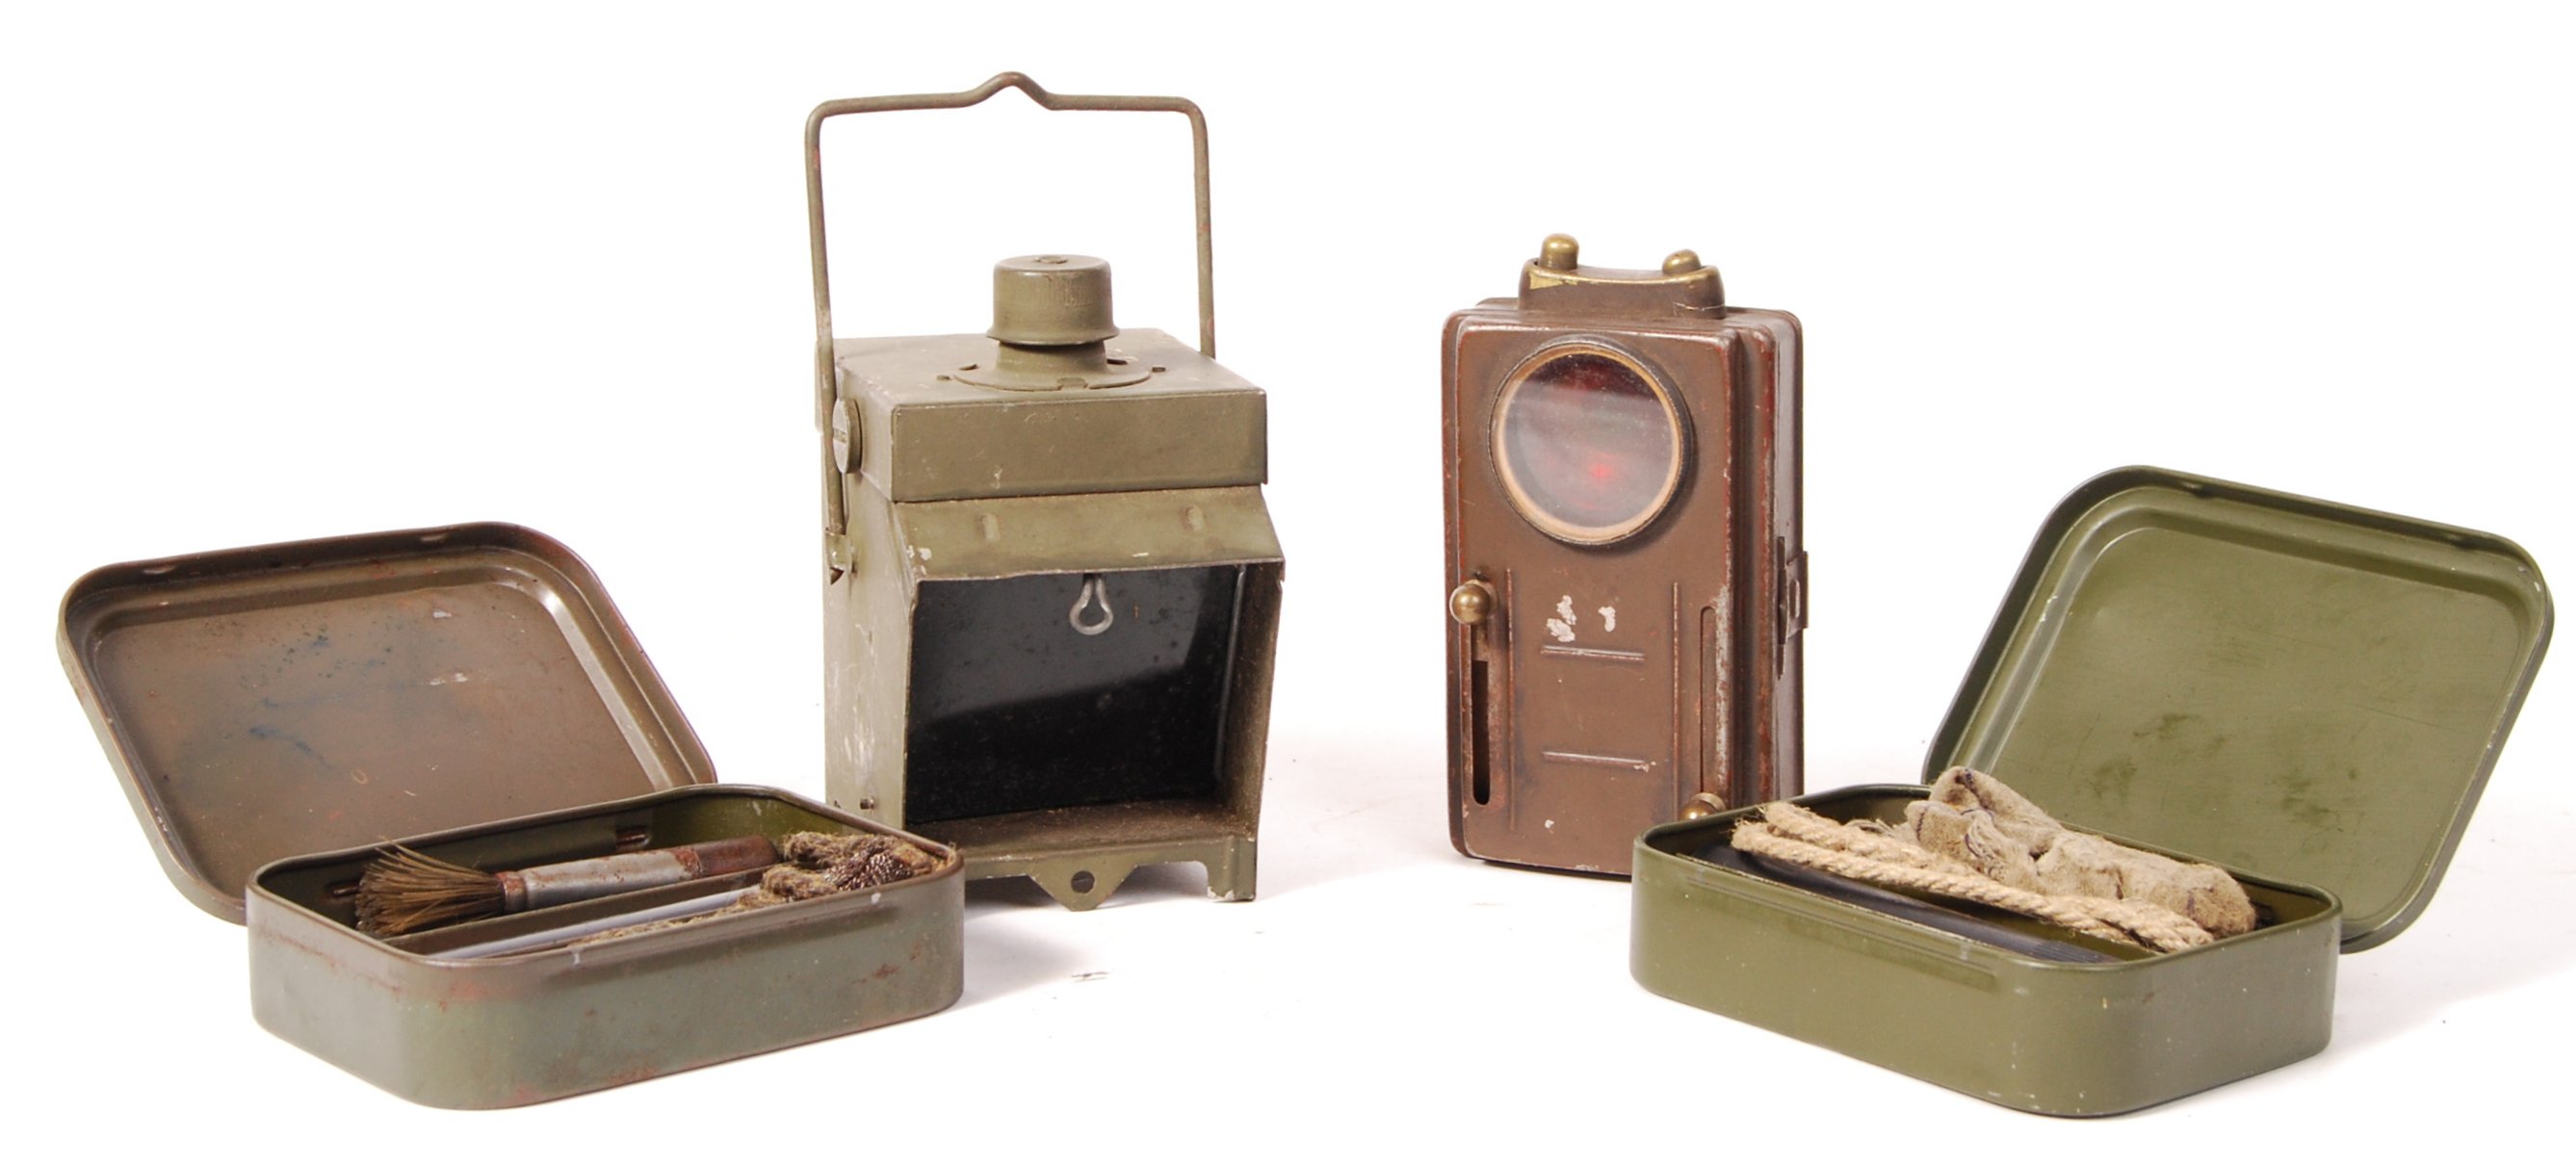 VINTAGE MILITARY SIGNALLING LAMPS & RIFLE CLEANING KITS